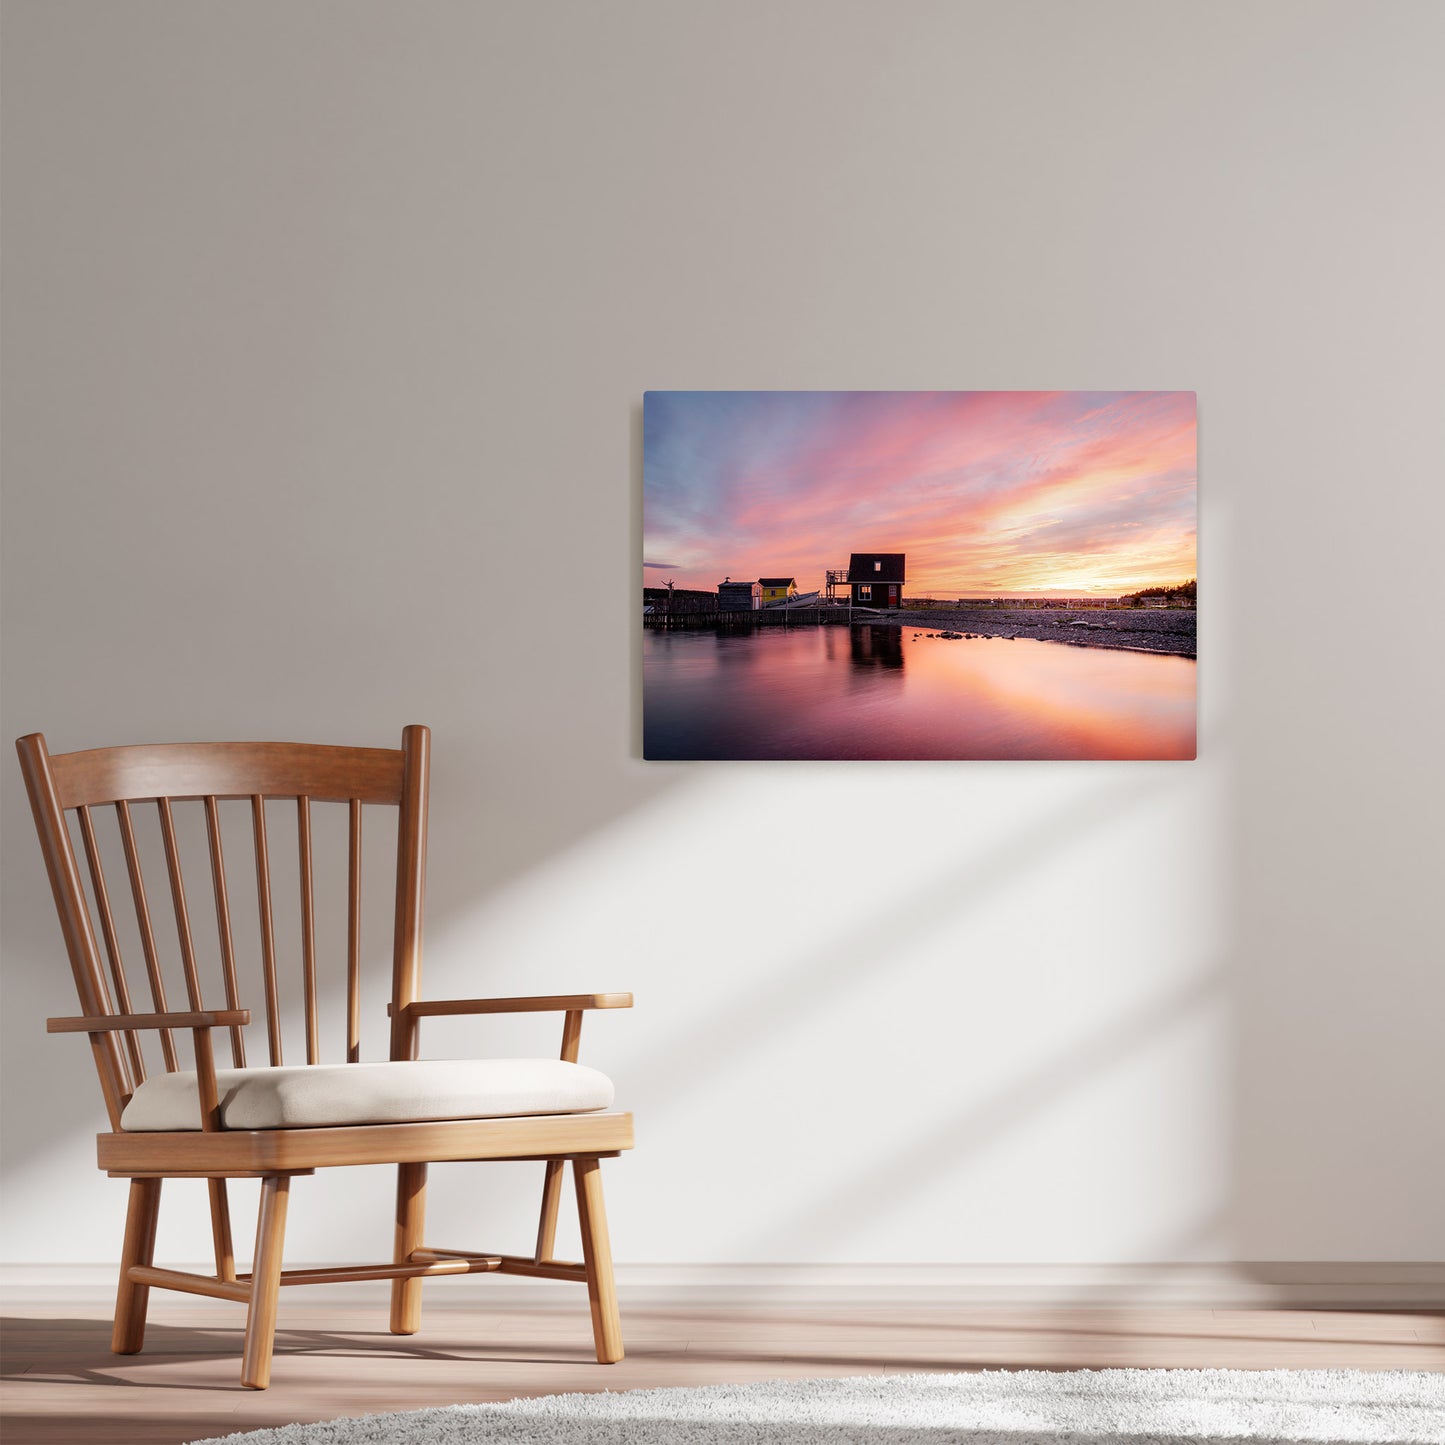 Ray Mackey's Green's Harbour Solstice photography reproduced on HD metal print and displayed on wall